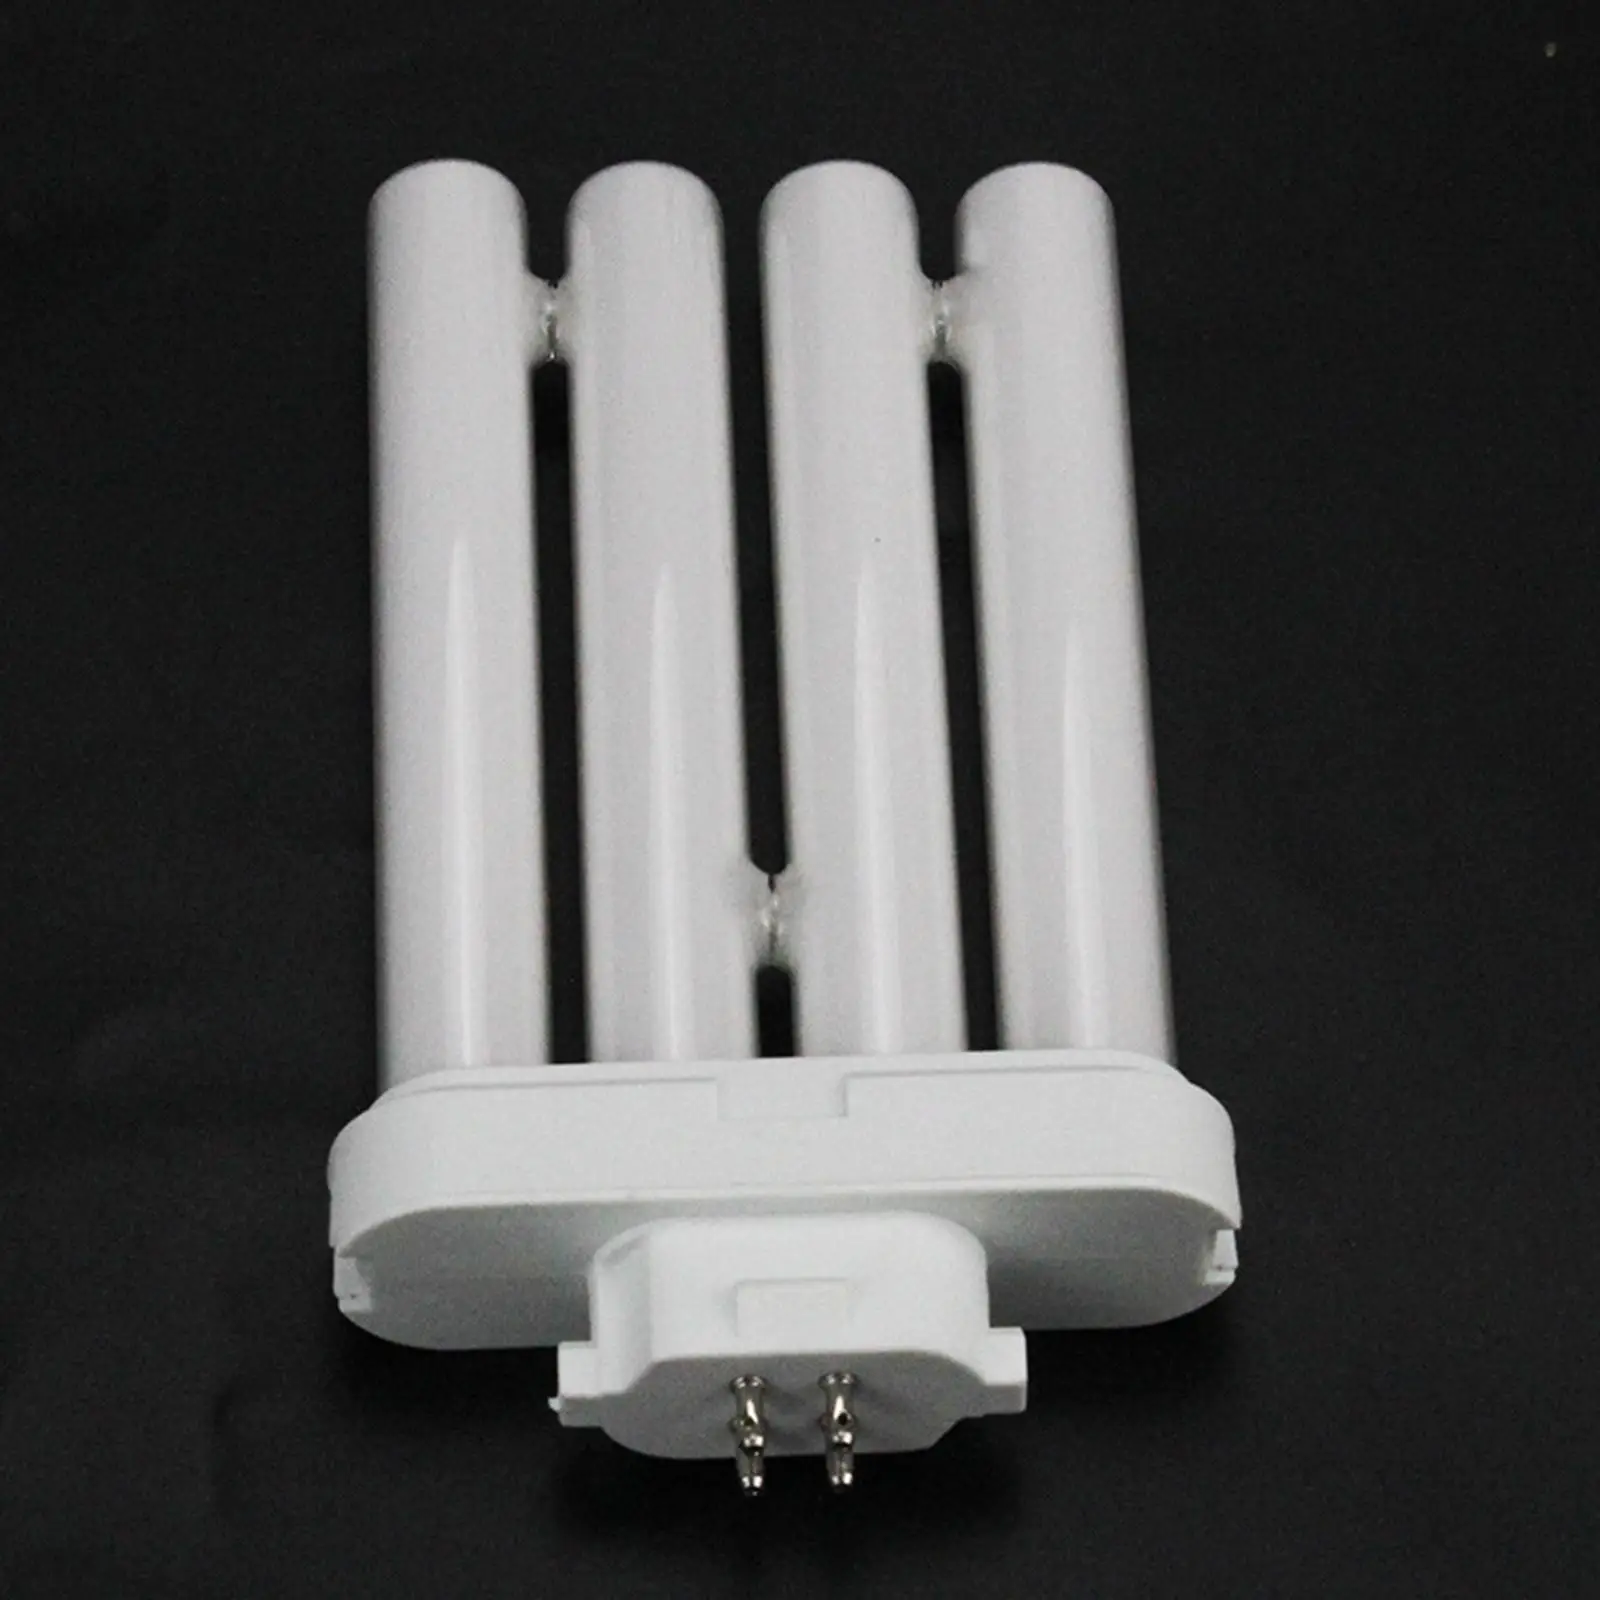 Quad Tube Lamp Portable Replacement Easy to Install Eye Protection Reading Tube Light Fluorescent Bulb Crafts Fluorescent Lamp